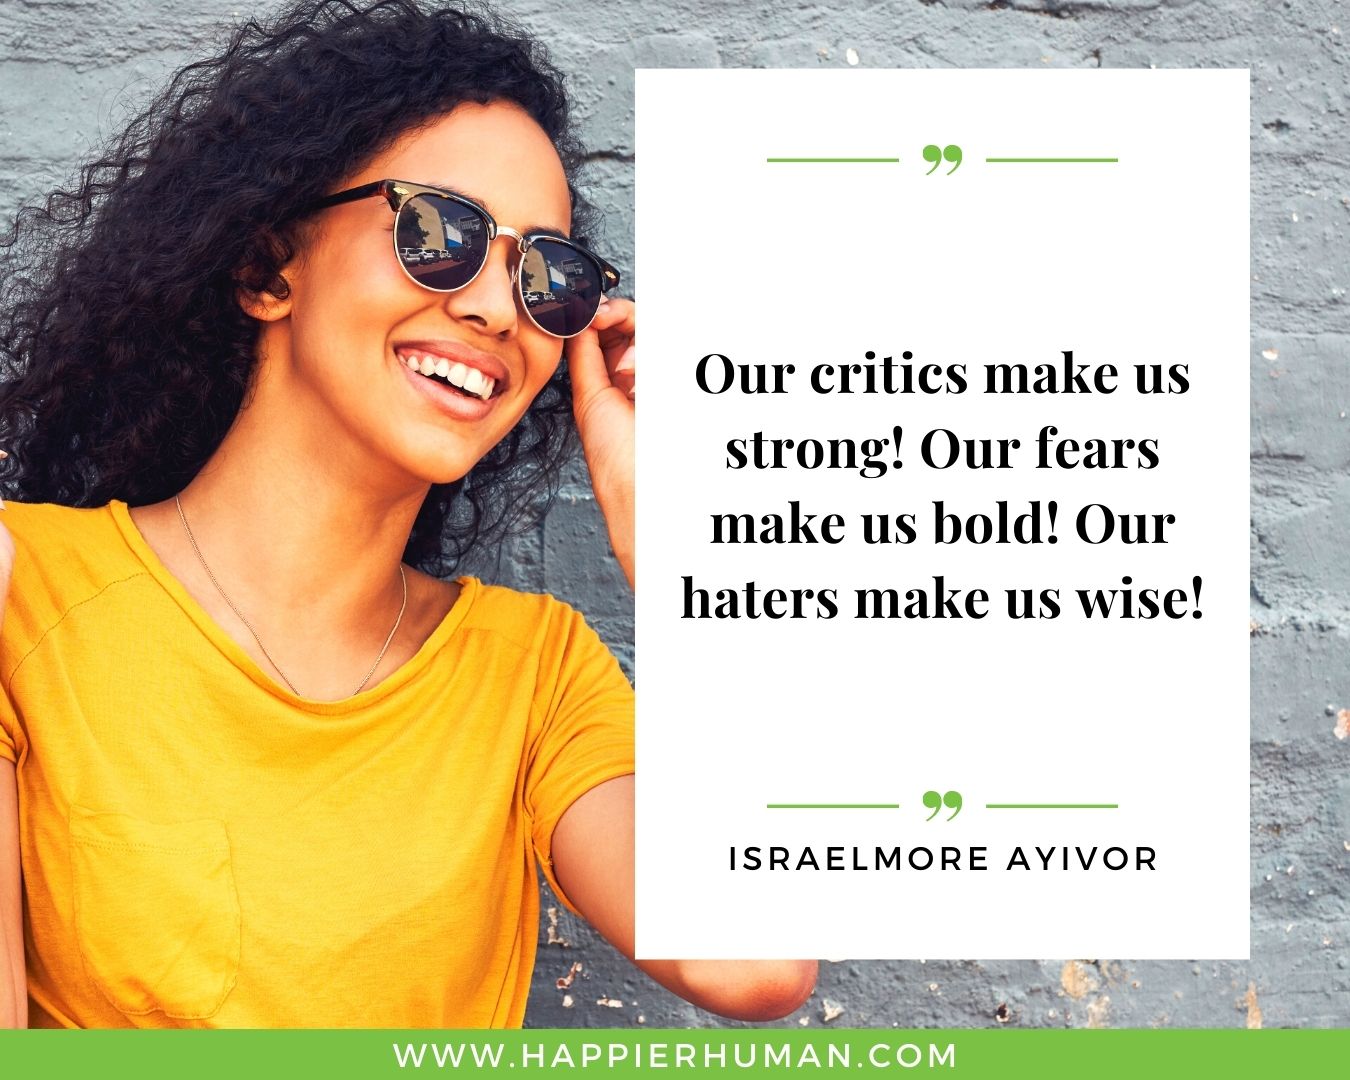 Haters Quotes - “Our critics make us strong! Our fears make us bold! Our haters make us wise!“ - Israelmore Ayivor